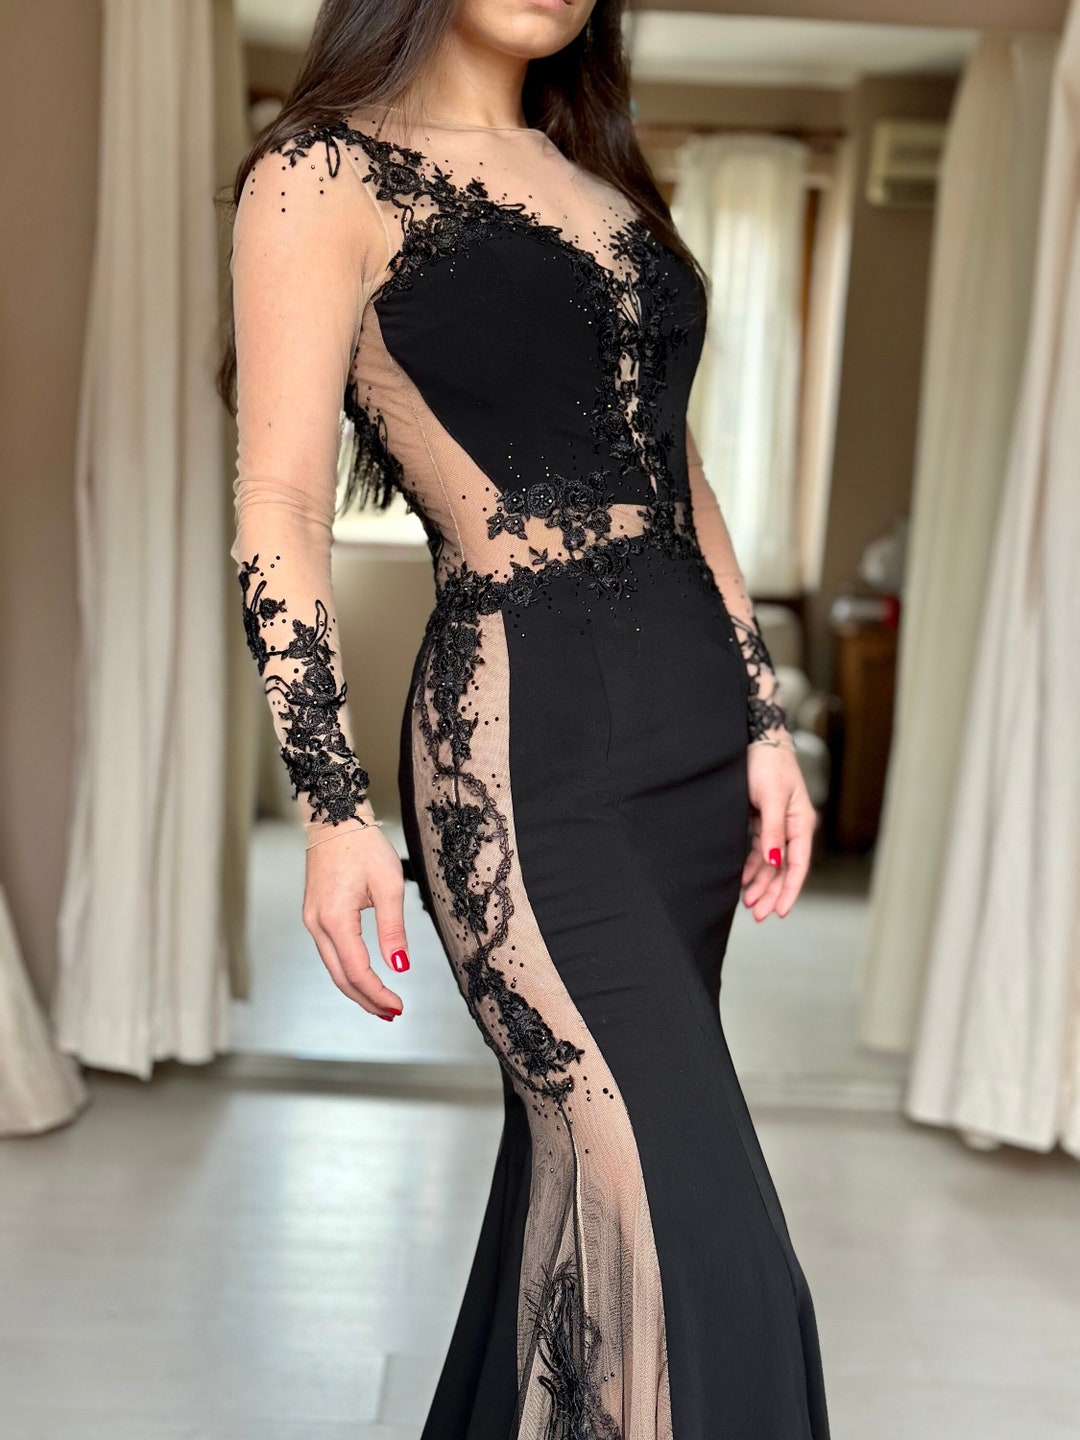 Long Black Formal Prom Dress with Lace Back